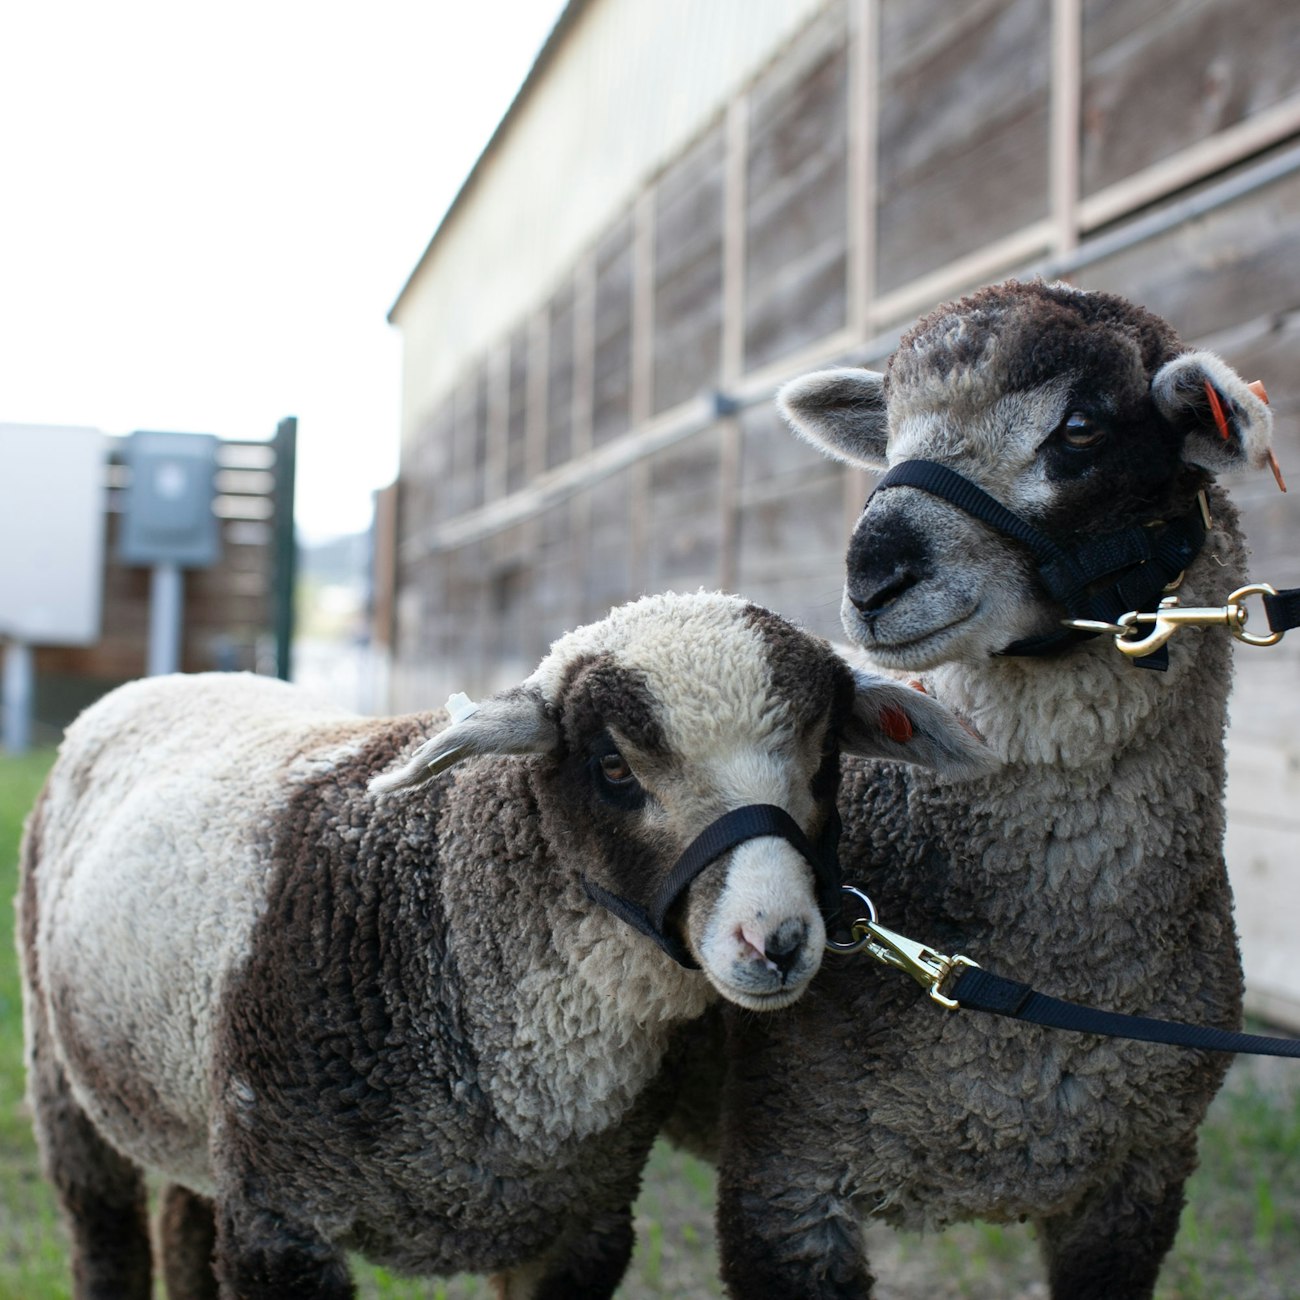 Two brown-and-white lambs on leads